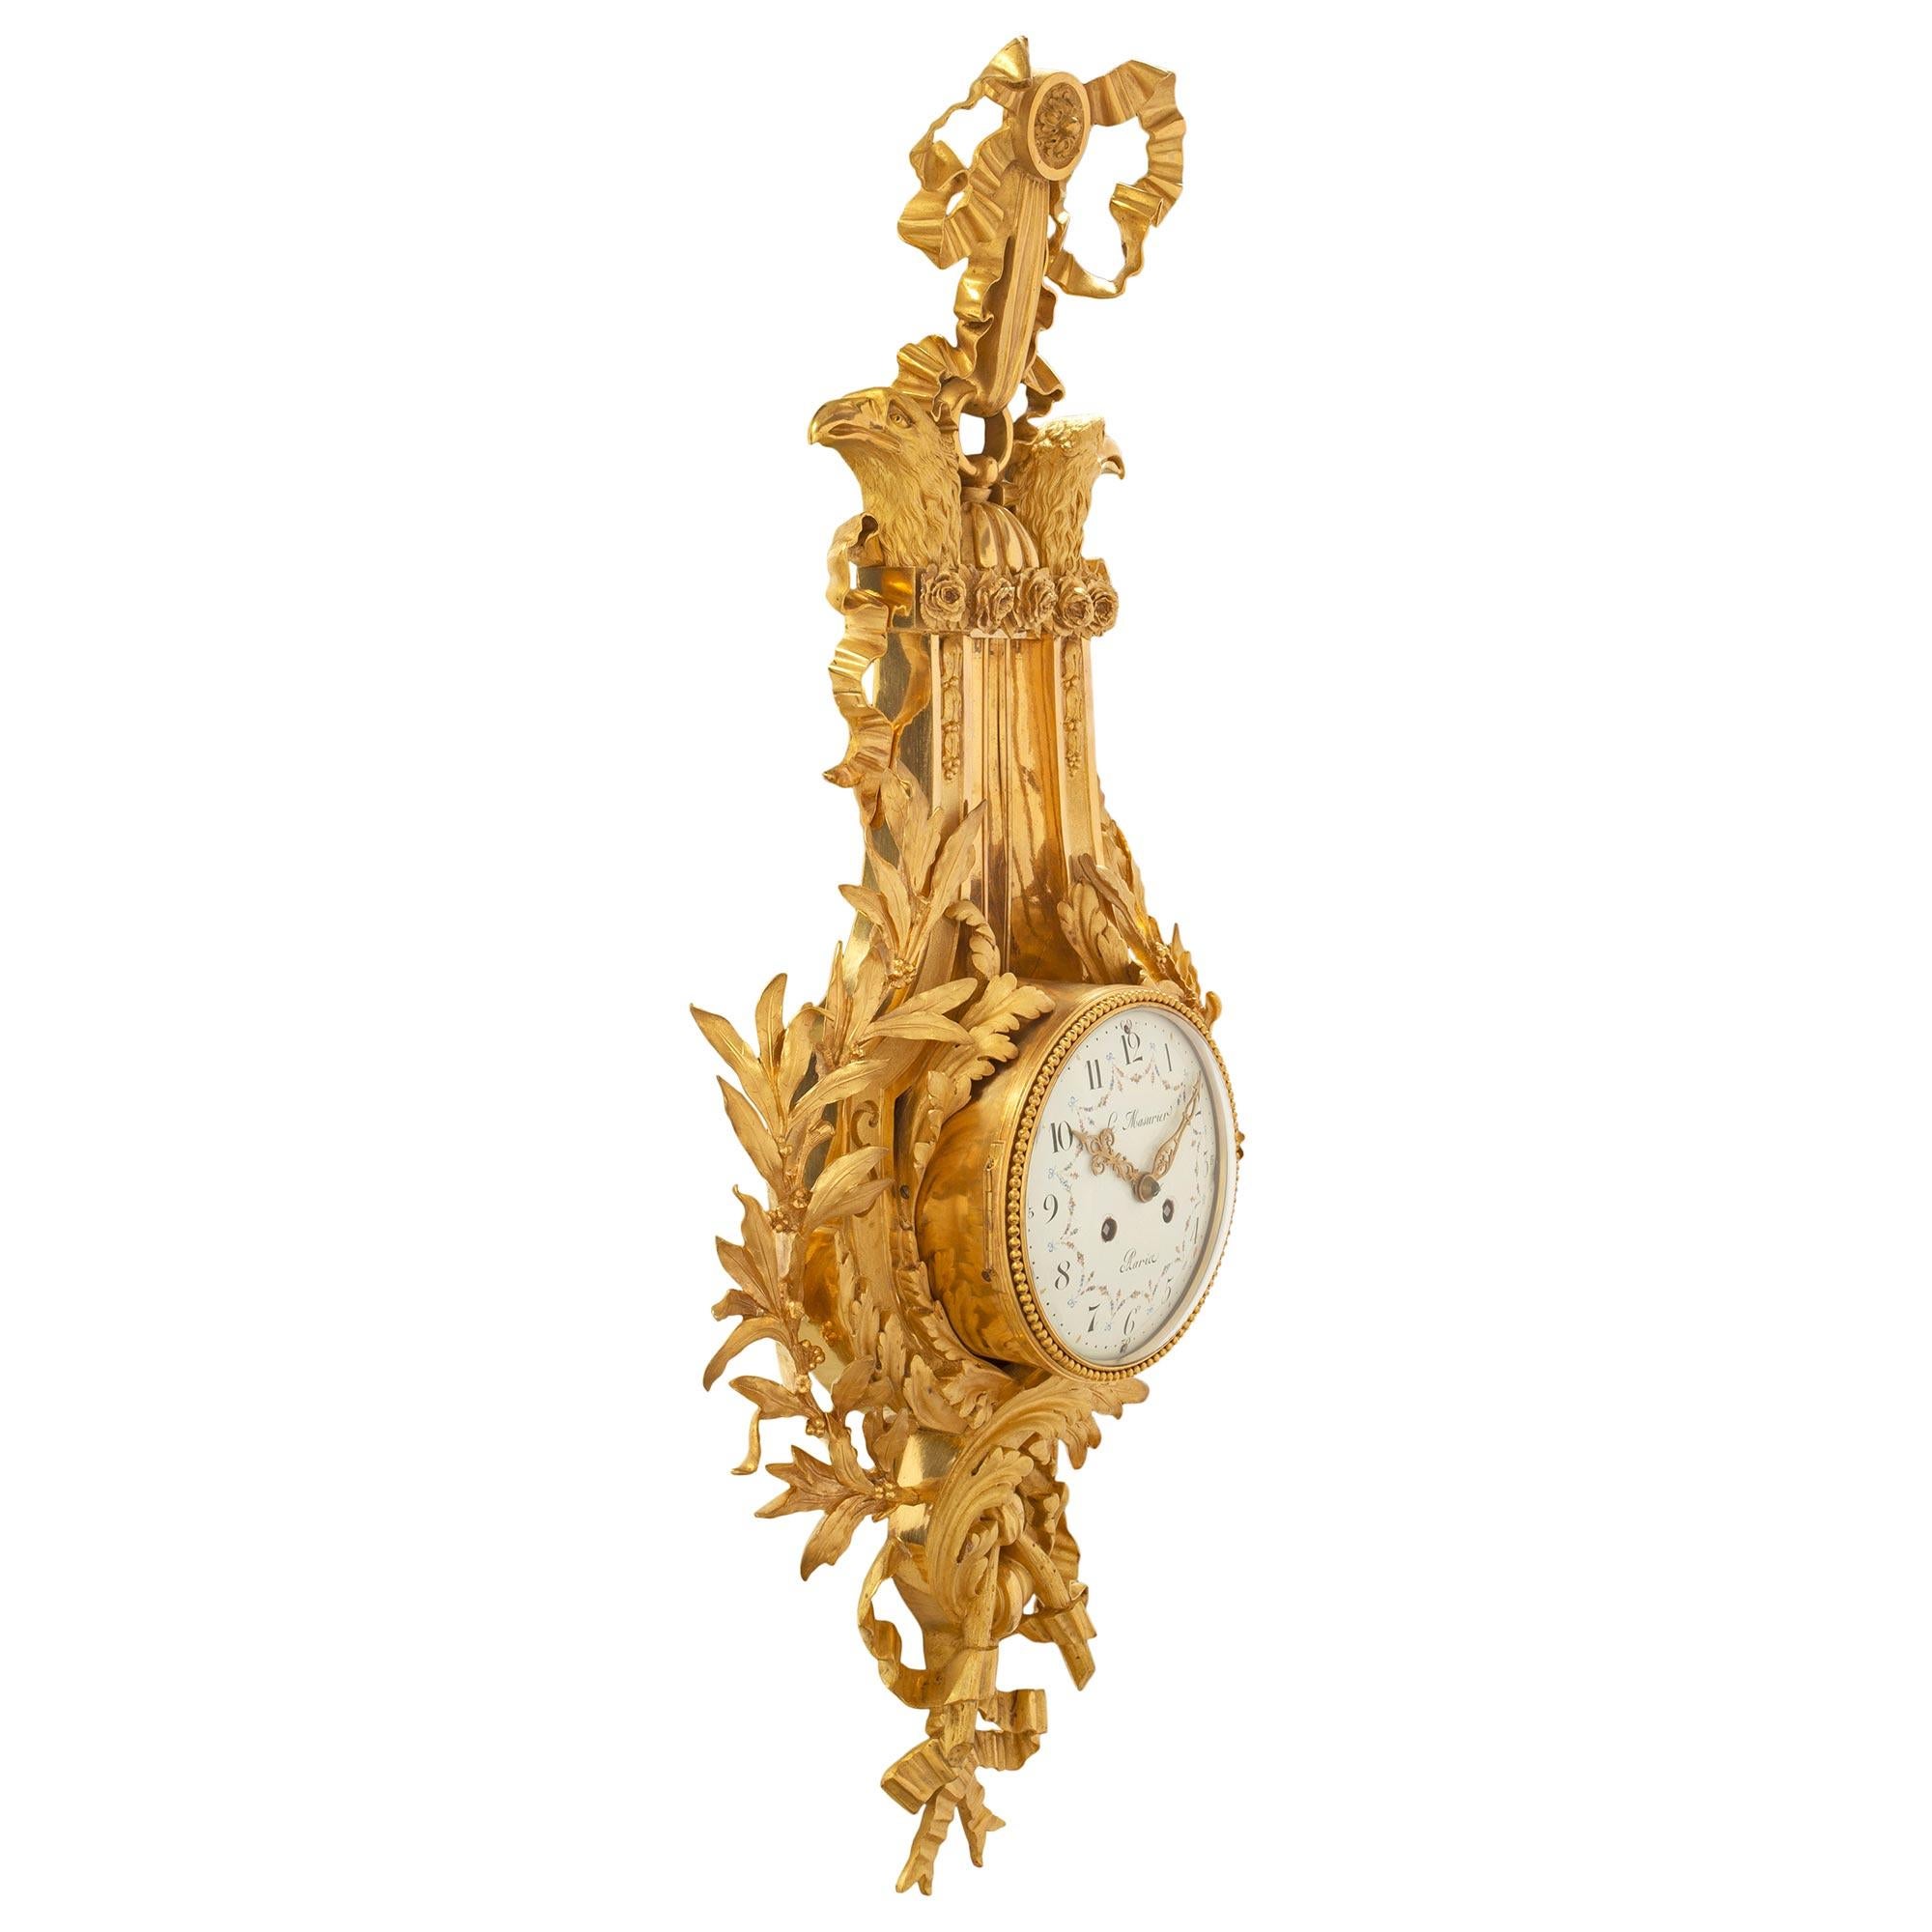 A most elegant and high quality French 19th century Louis XVI st. cartel clock, signed Le Masurier Paris. The richly chased ormolu case is in the shape of a lyre. At the bottom are tied berried laurel garlands which follow the contours of the clock